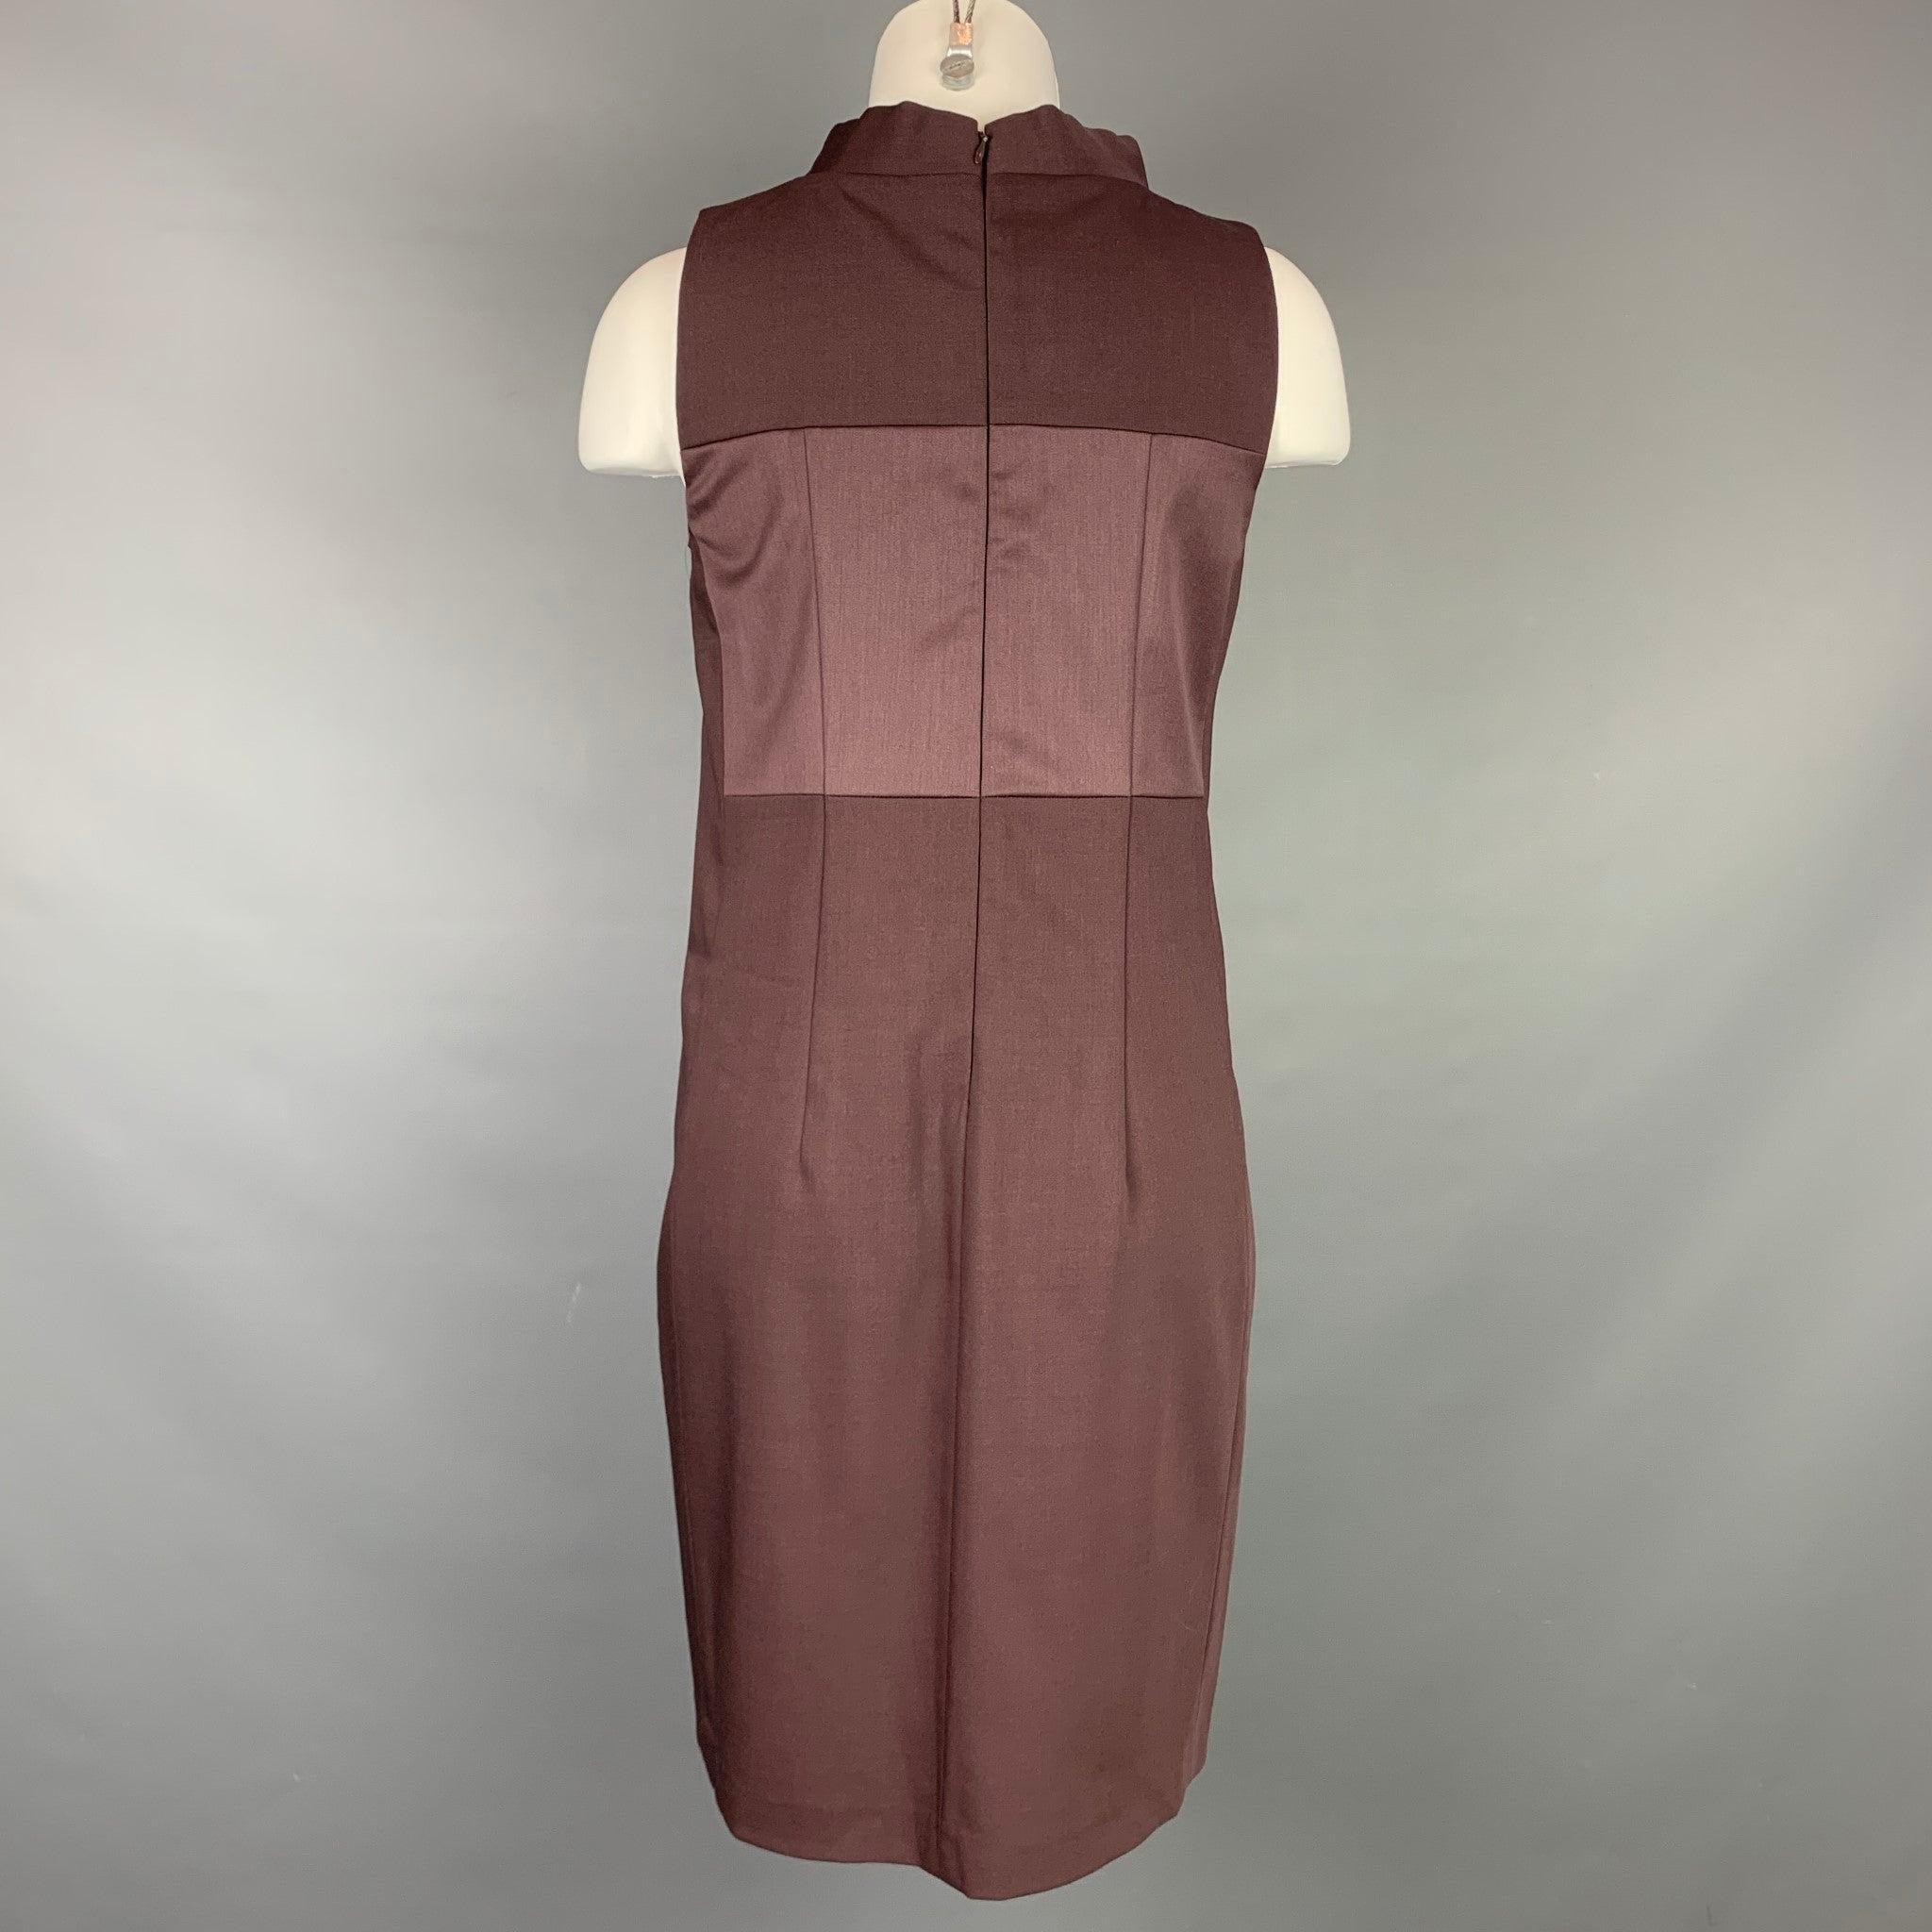 BRUNELLO CUCINELLI Size M Eggplant Virgin Wool A-line Sleeveless Dress In Good Condition For Sale In San Francisco, CA